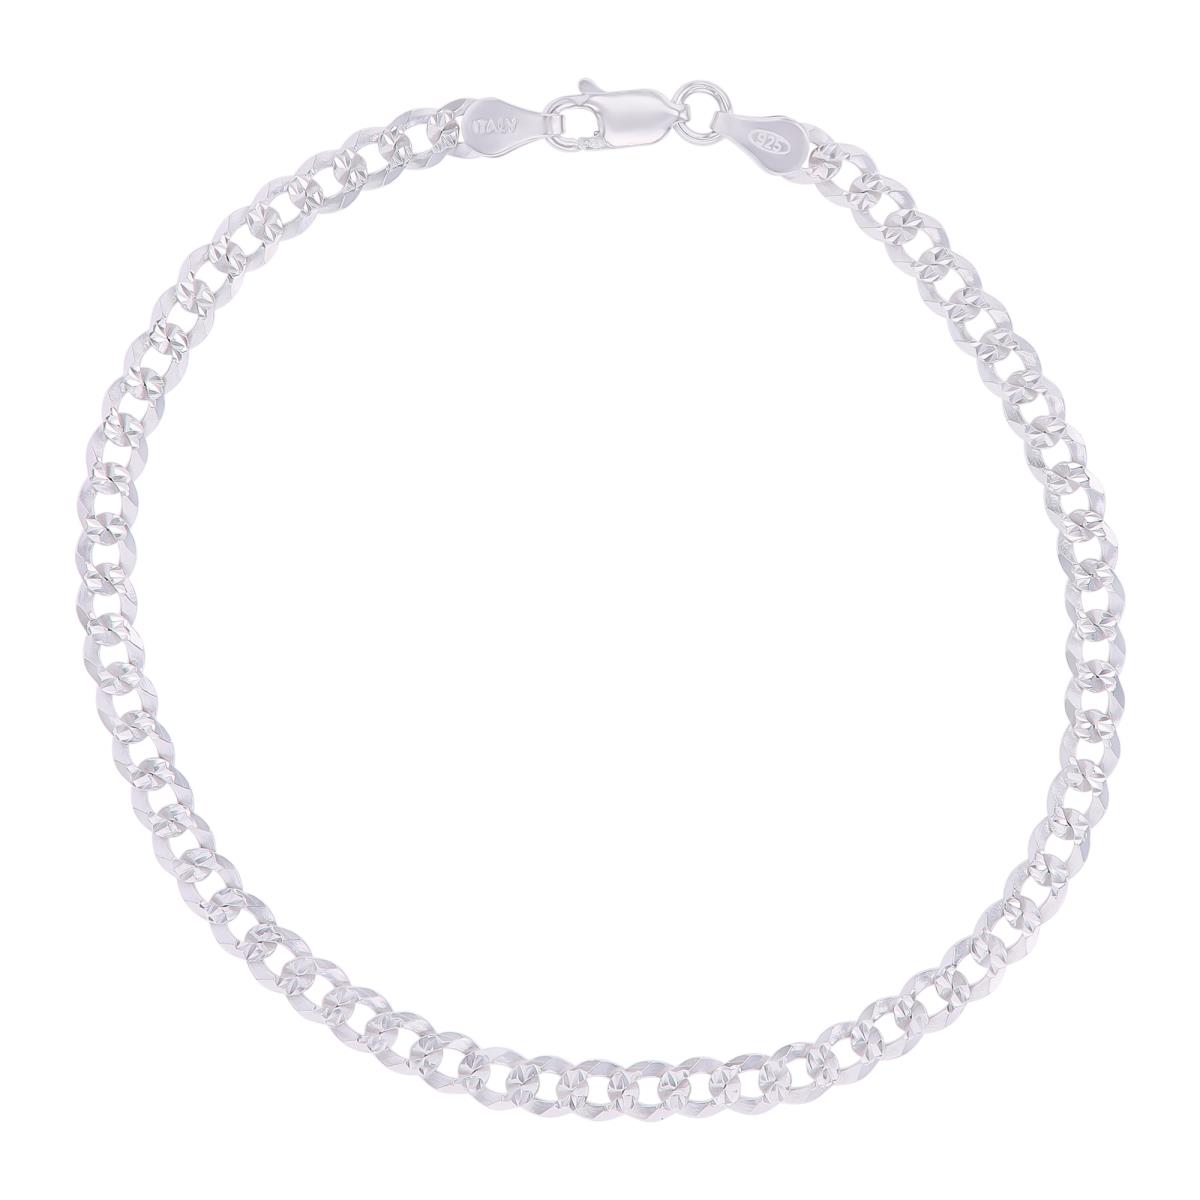 Sterling Silver Anti-Tarnish DC 4mm 100 Curb Pave 10"Chain Bracelet